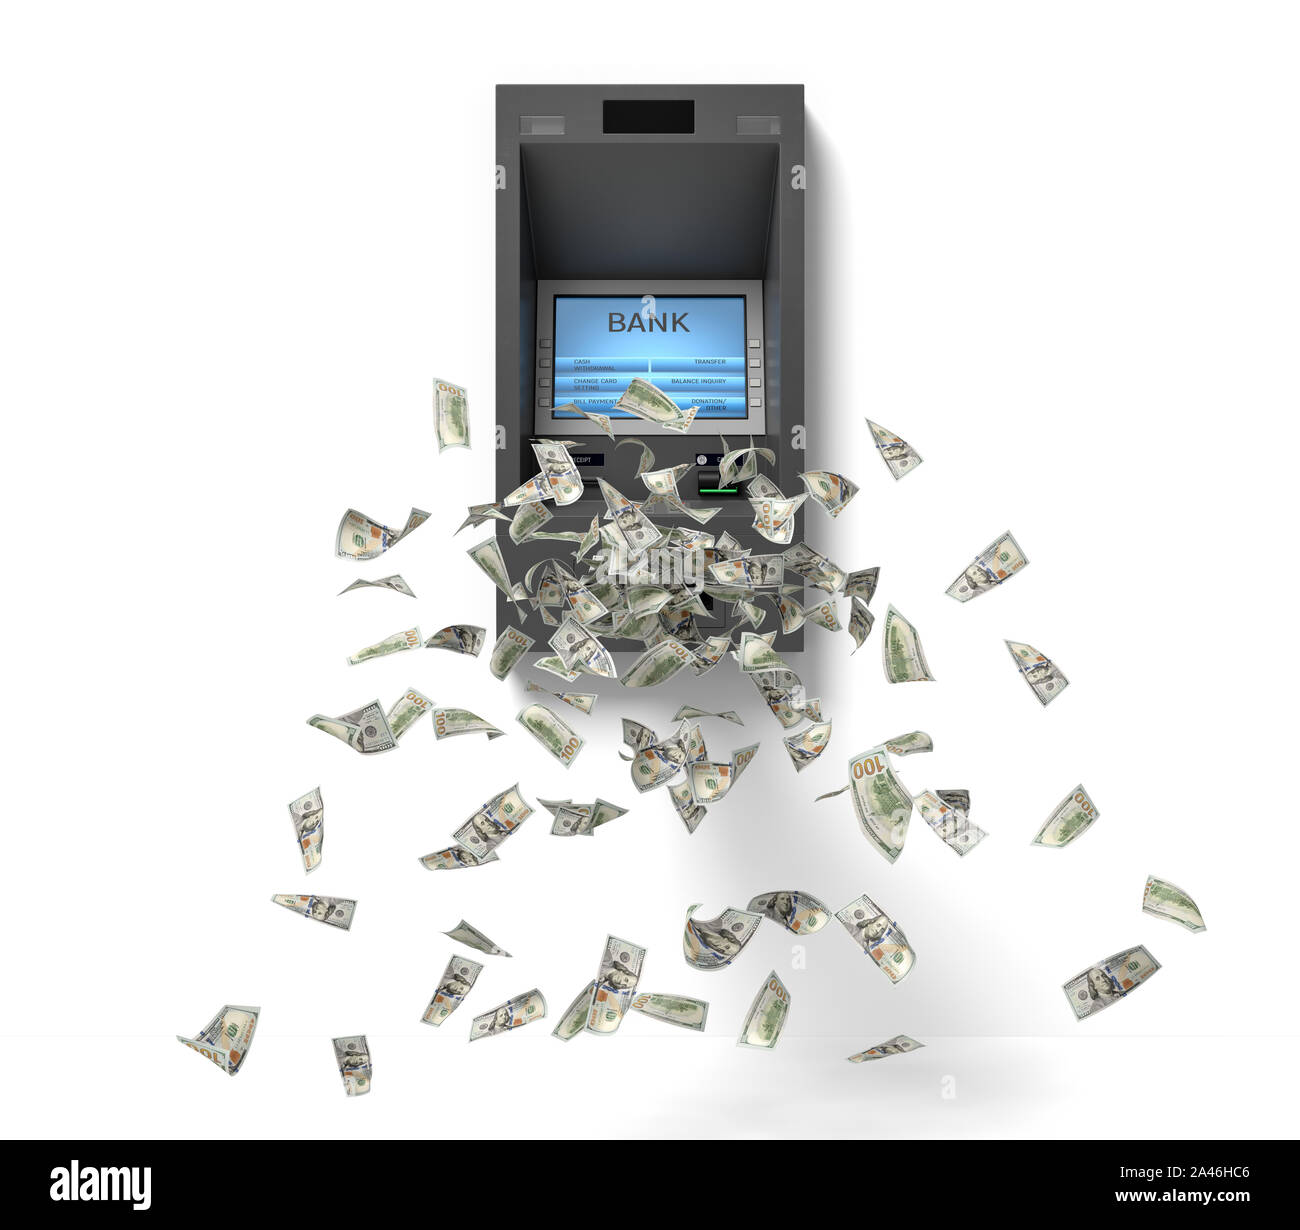 3d rendering of a wall bank ATM machine with green banknotes flying out of it. Personal account. Taking all cash. Dollars from banking machine. Stock Photo